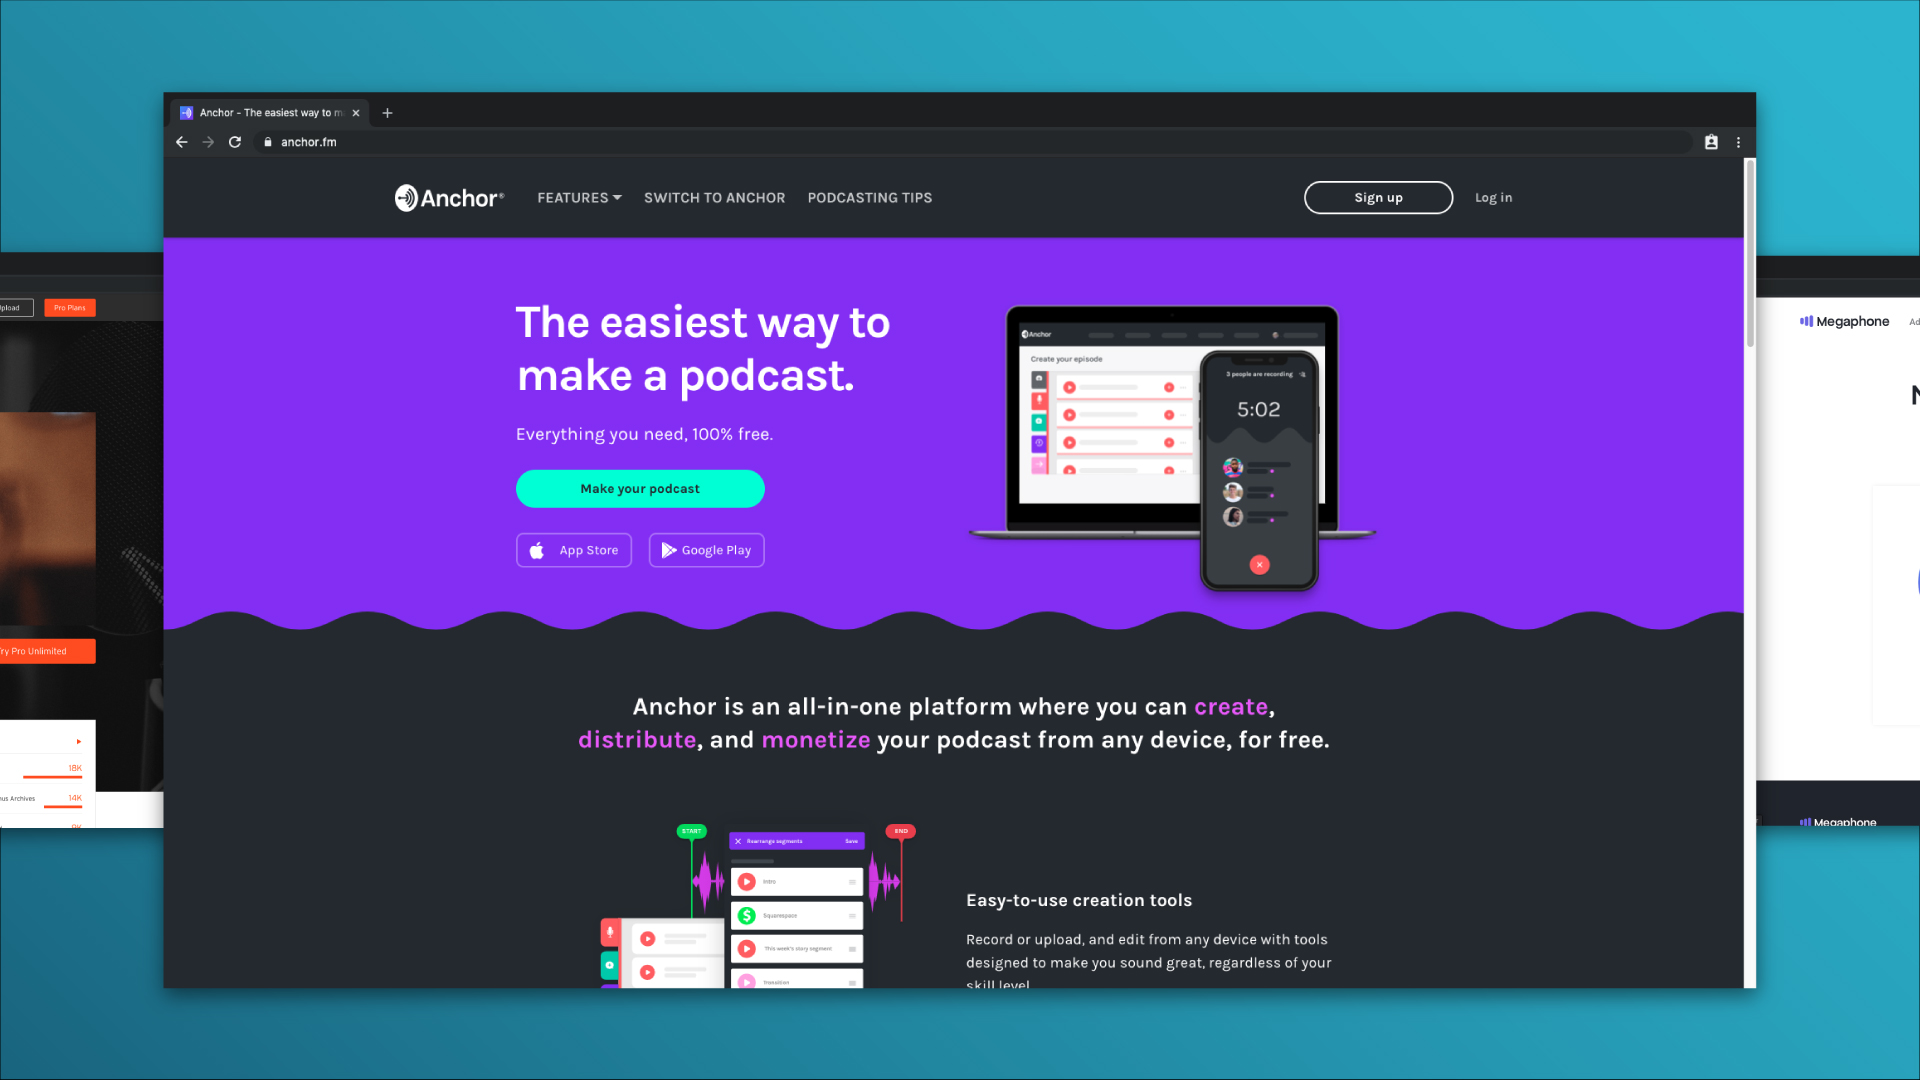 A look at the features and benefits of Anchor podcast hosting platform